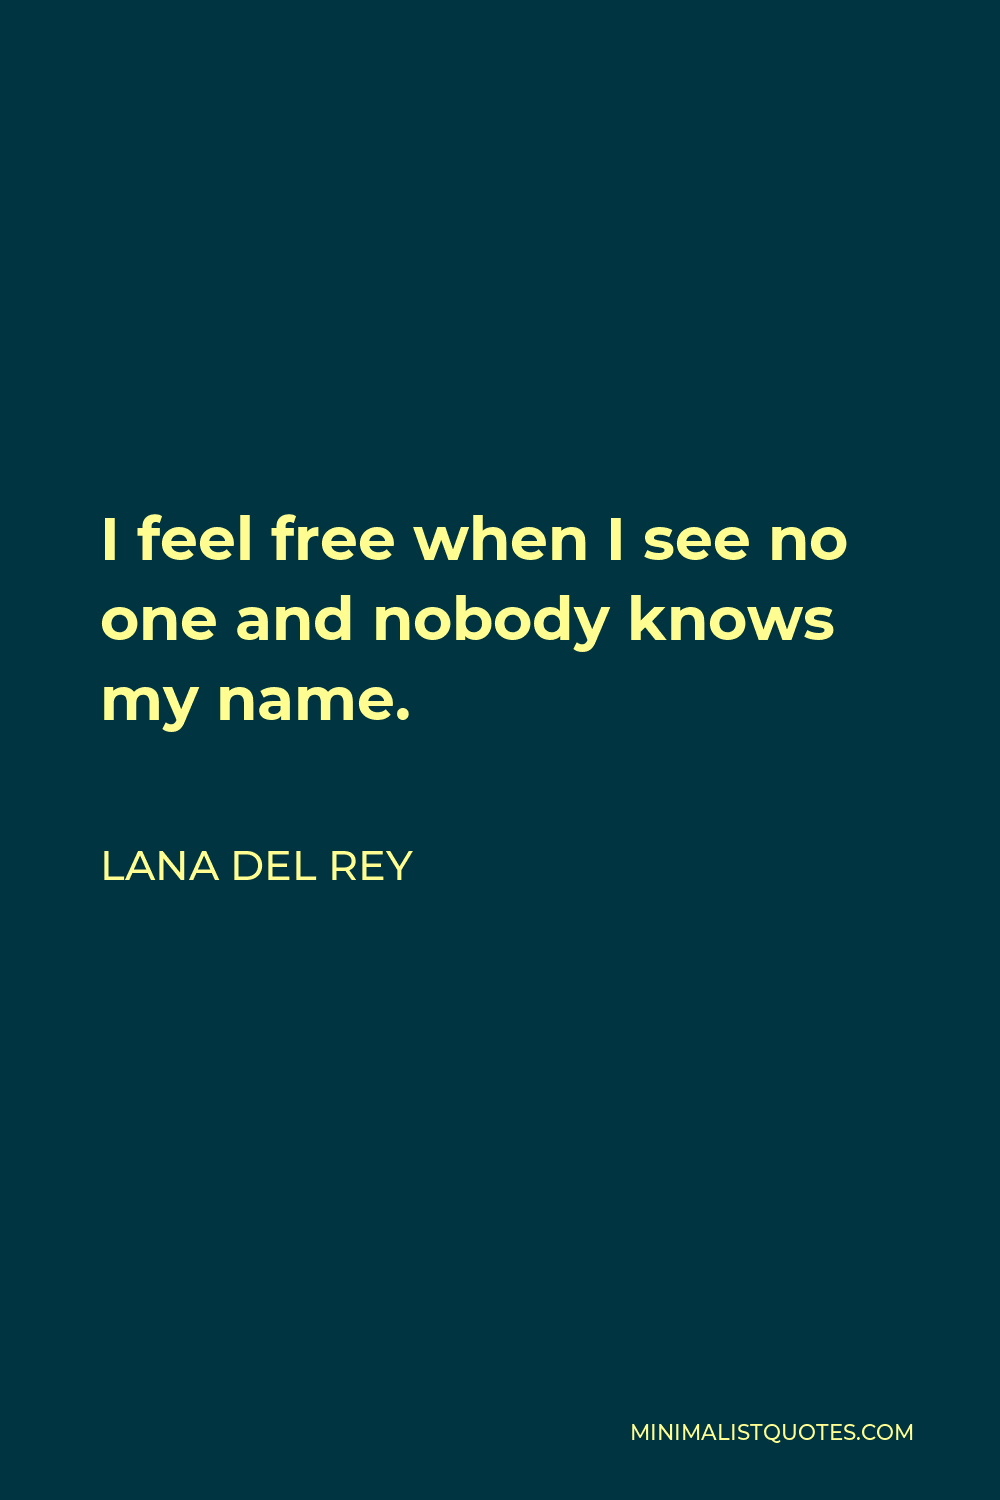 Lana Del Rey Quote - I feel free when I see no one and nobody knows my name.